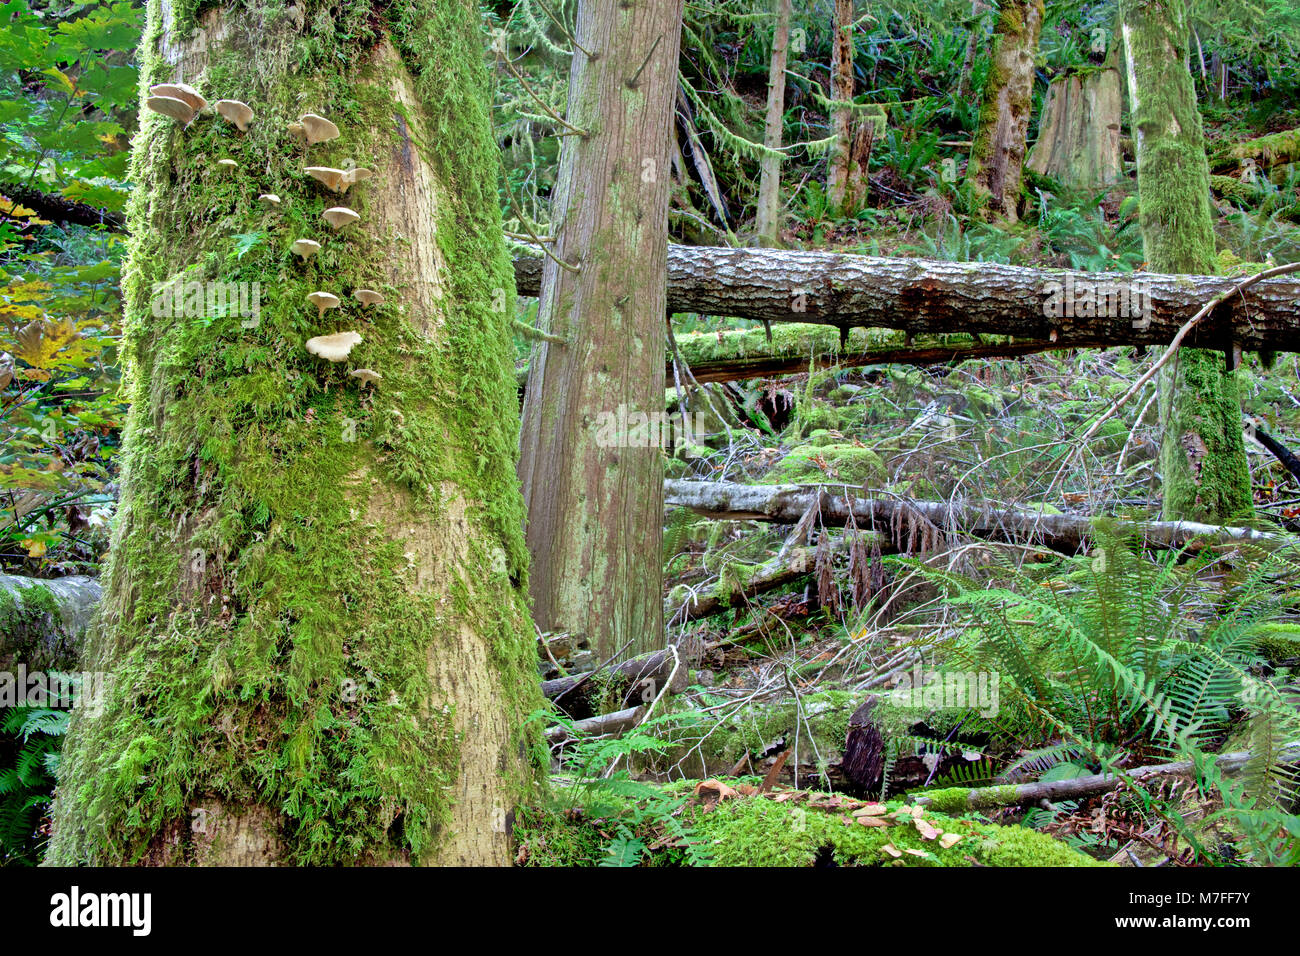 Moss covered fir trees inhabit this rainforest near Sechelt on the Sunshine Coast of British Columbia, north of the city of Vancouver, Canada. Stock Photo